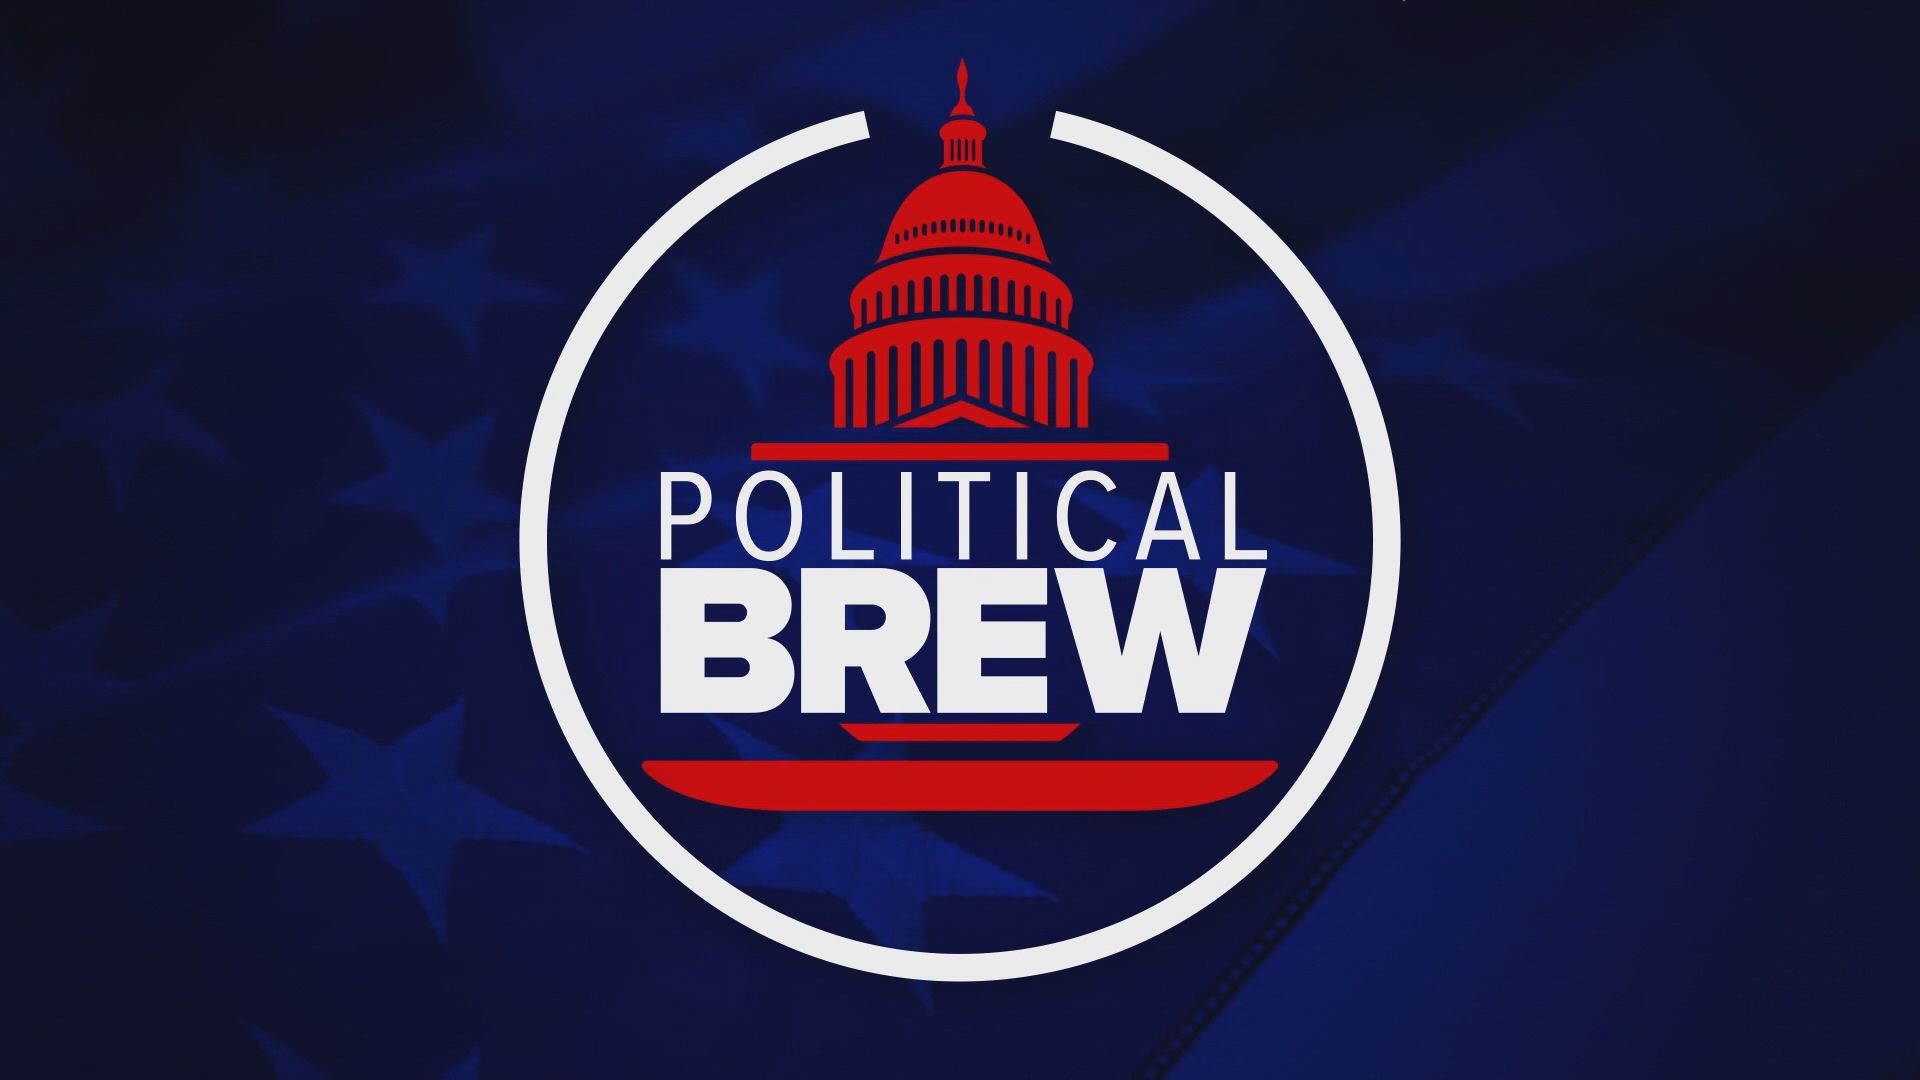 NEWS CENTER Maine's political analysts Phil Harriman and Ethan Strimling weigh in on the major political issues of the week.